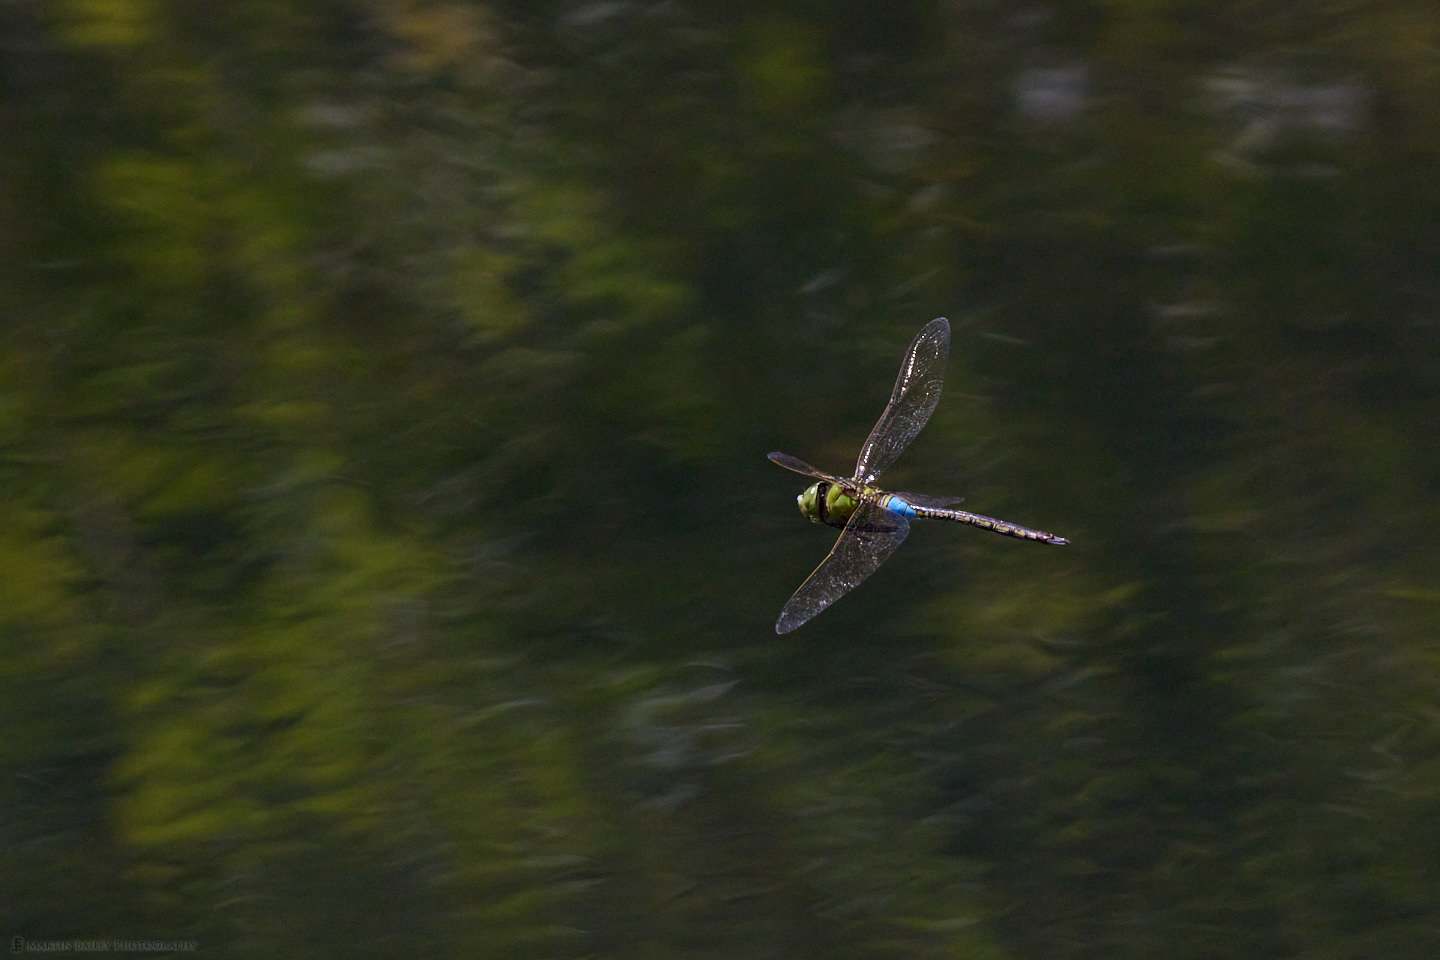 Lesser Emperor Dragonfly in Flight Over Reflected Foliage